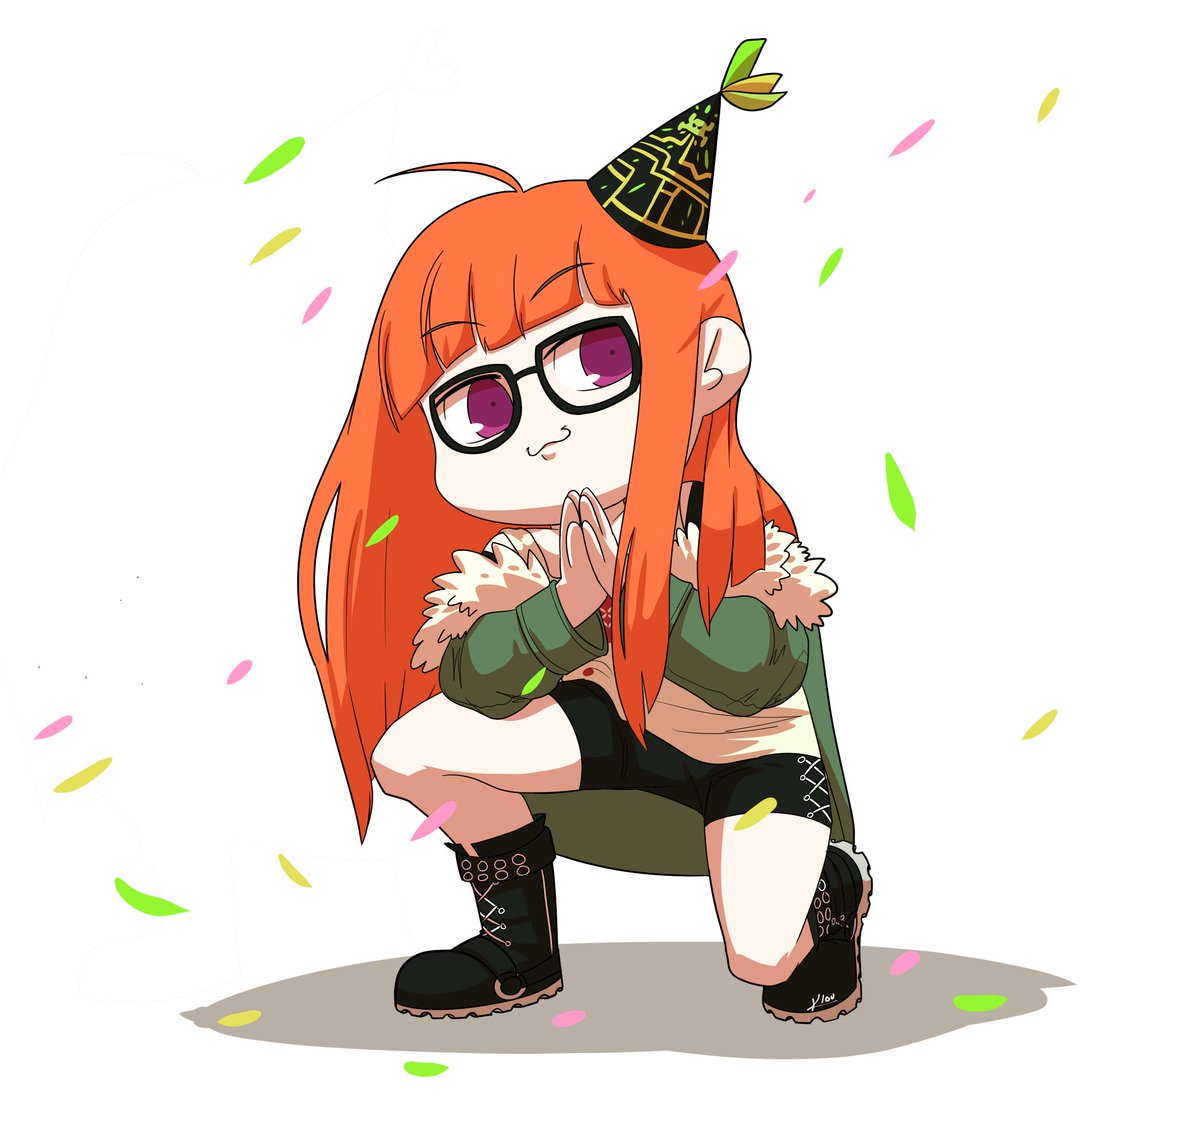 A little something for Futaba's birthday! pic.twitter.com/Pdx9enenFP. 